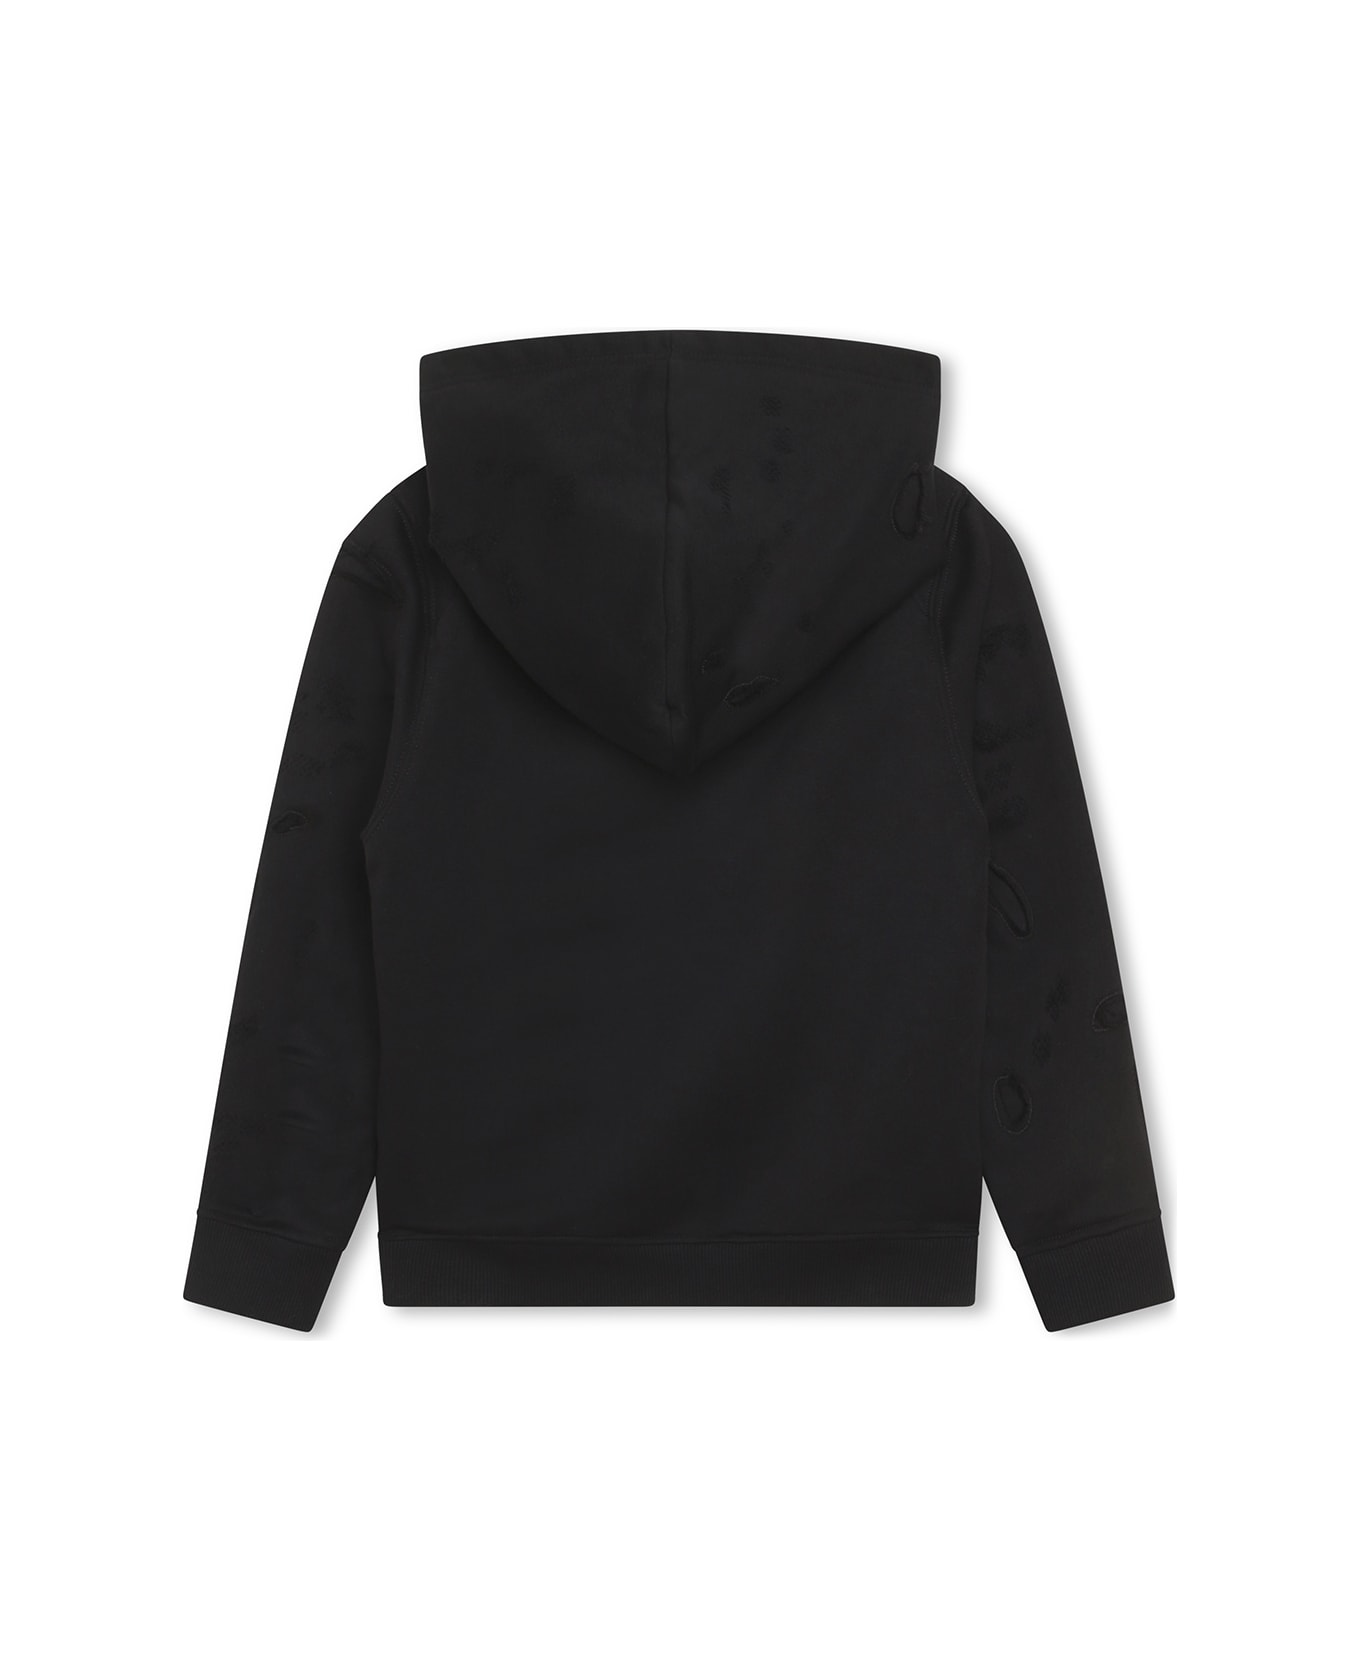 Givenchy Black Hoodie With Logo And Distressed Effect - Black